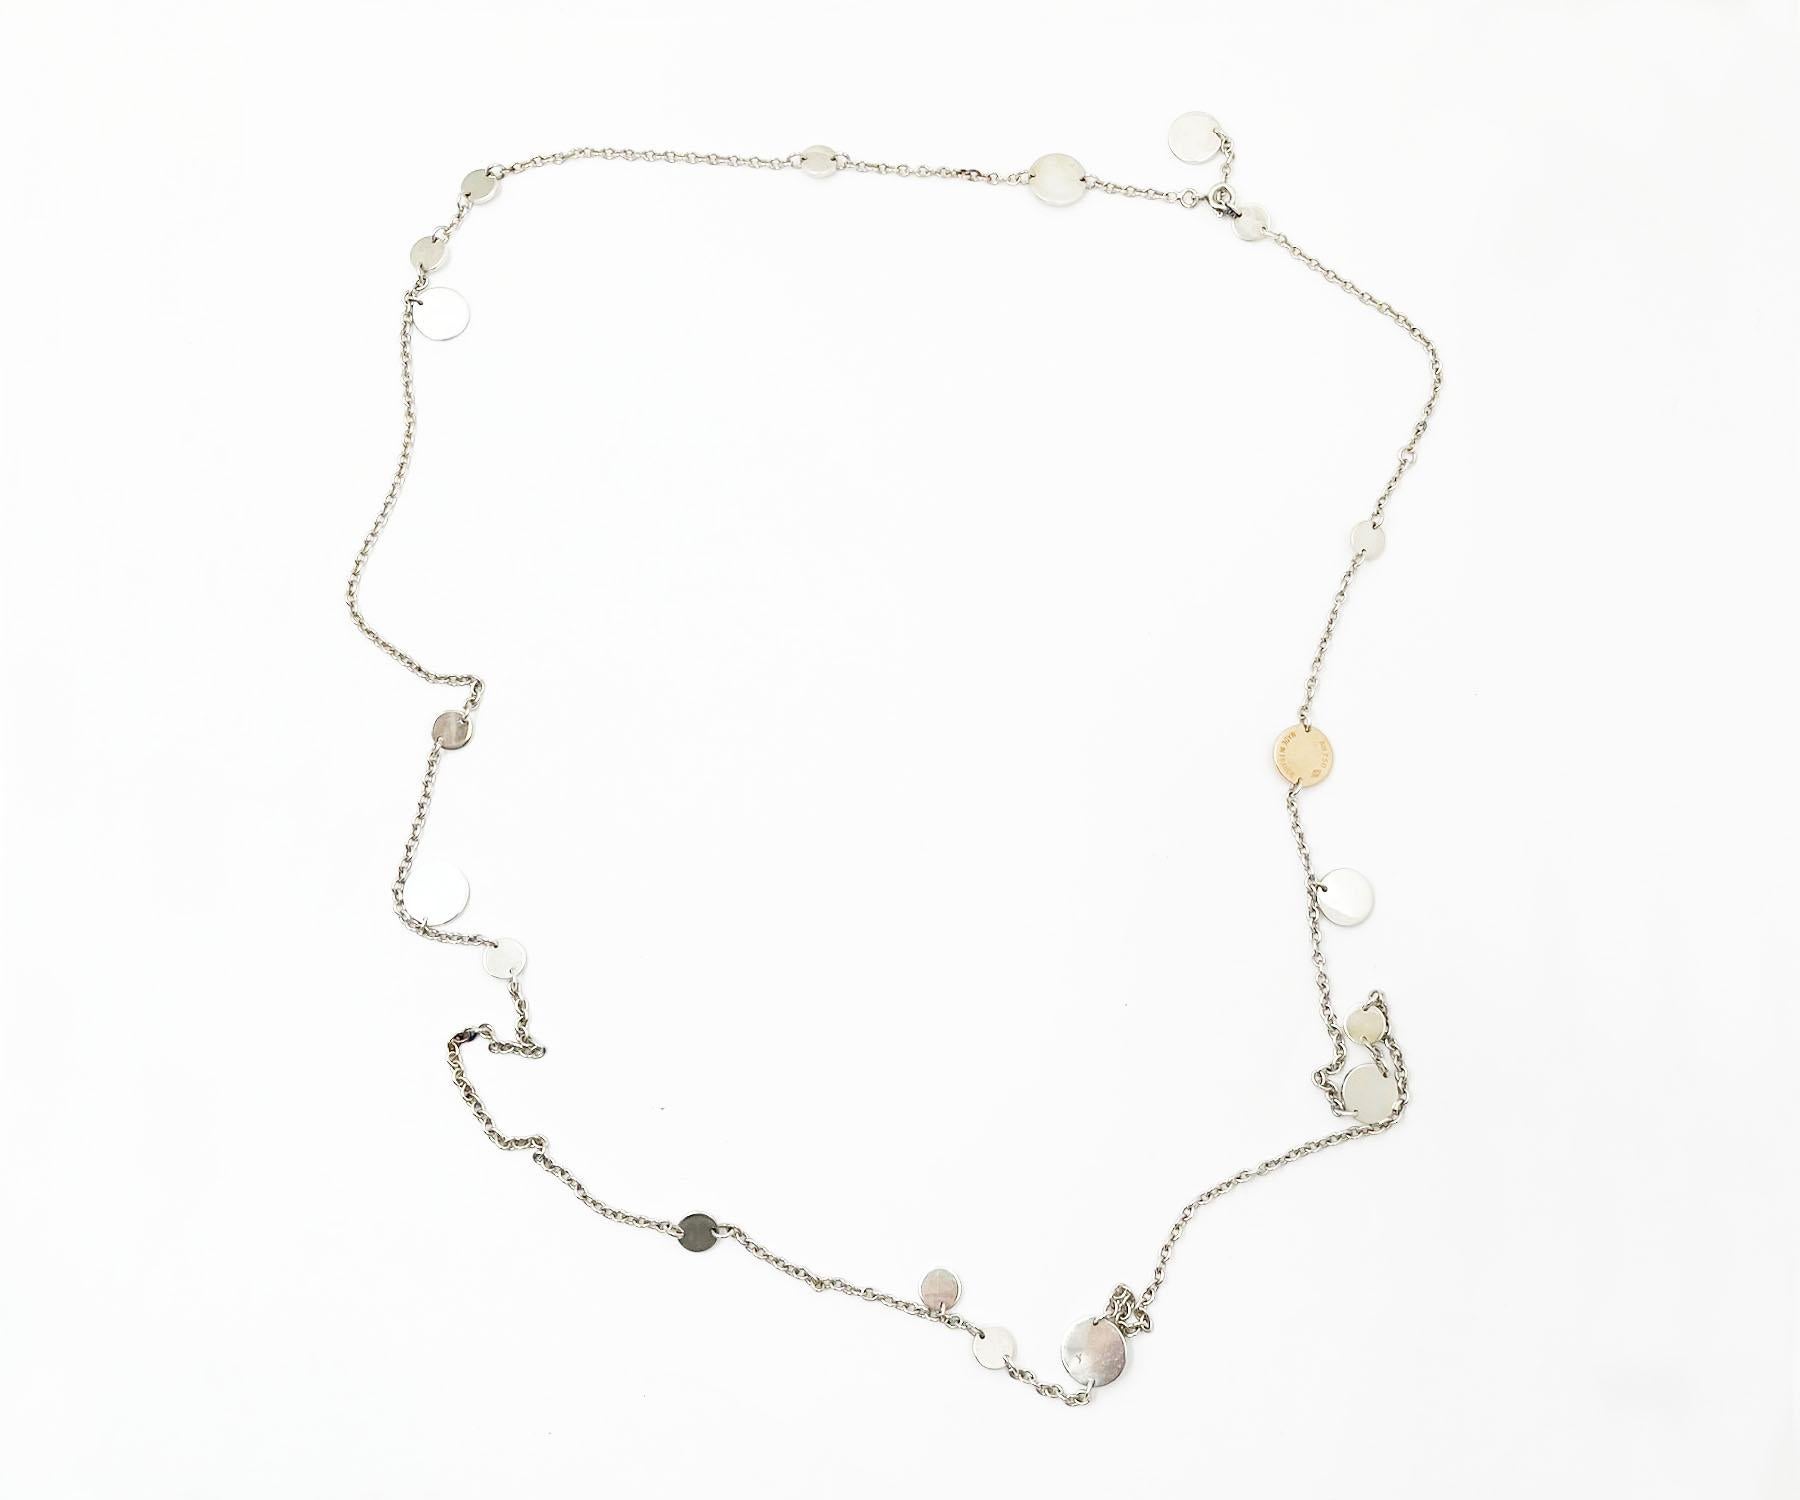 Artisan Hermes Silver 925 Gold 750 Confetti Necklace